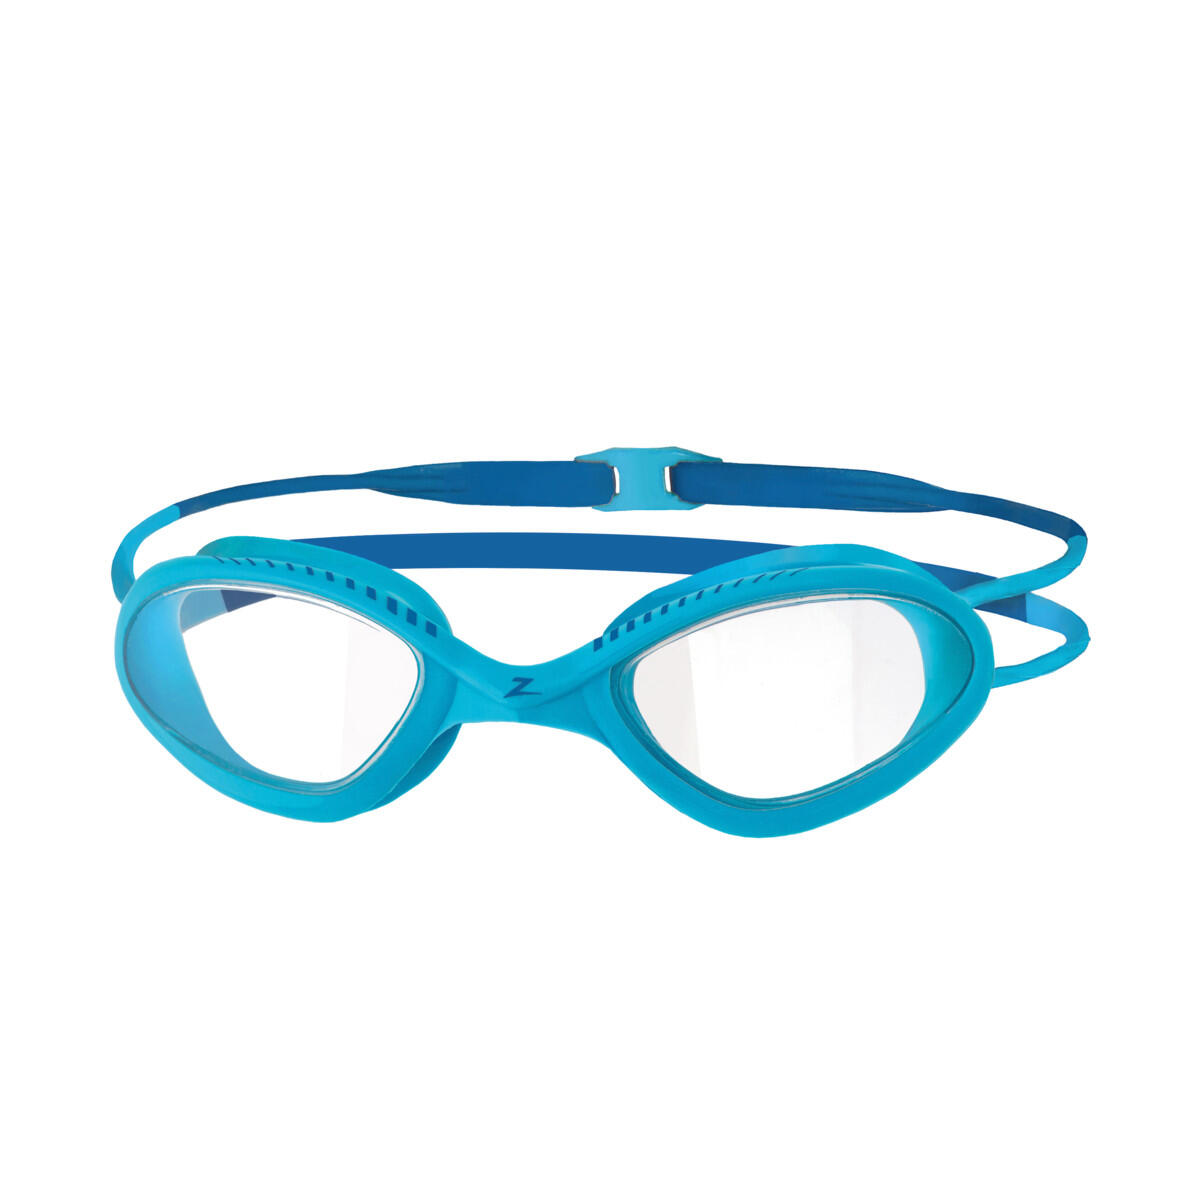 Zoggs Tiger Goggles - Blue/ Blue Reef/ Clear 1/1